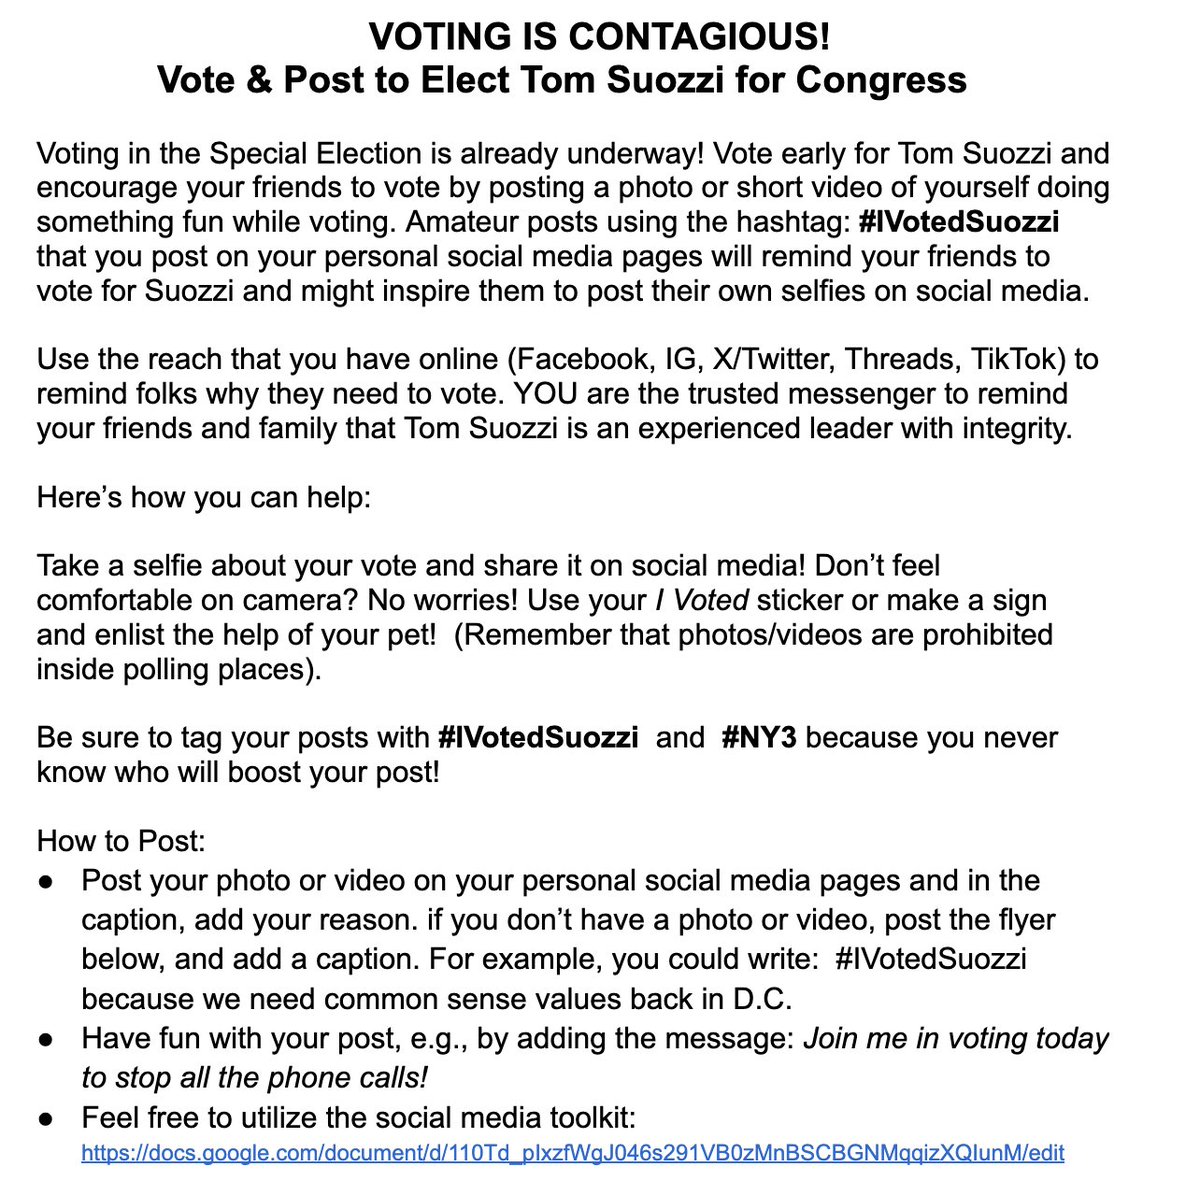 Voting is Contagious! Post a picture of yourself voting in the #NY03 Special Election with the hashtag #IVotedSuozzi and why you voted for Tom Suozzi! Access the text and social media toolkit in the linktree in our bio